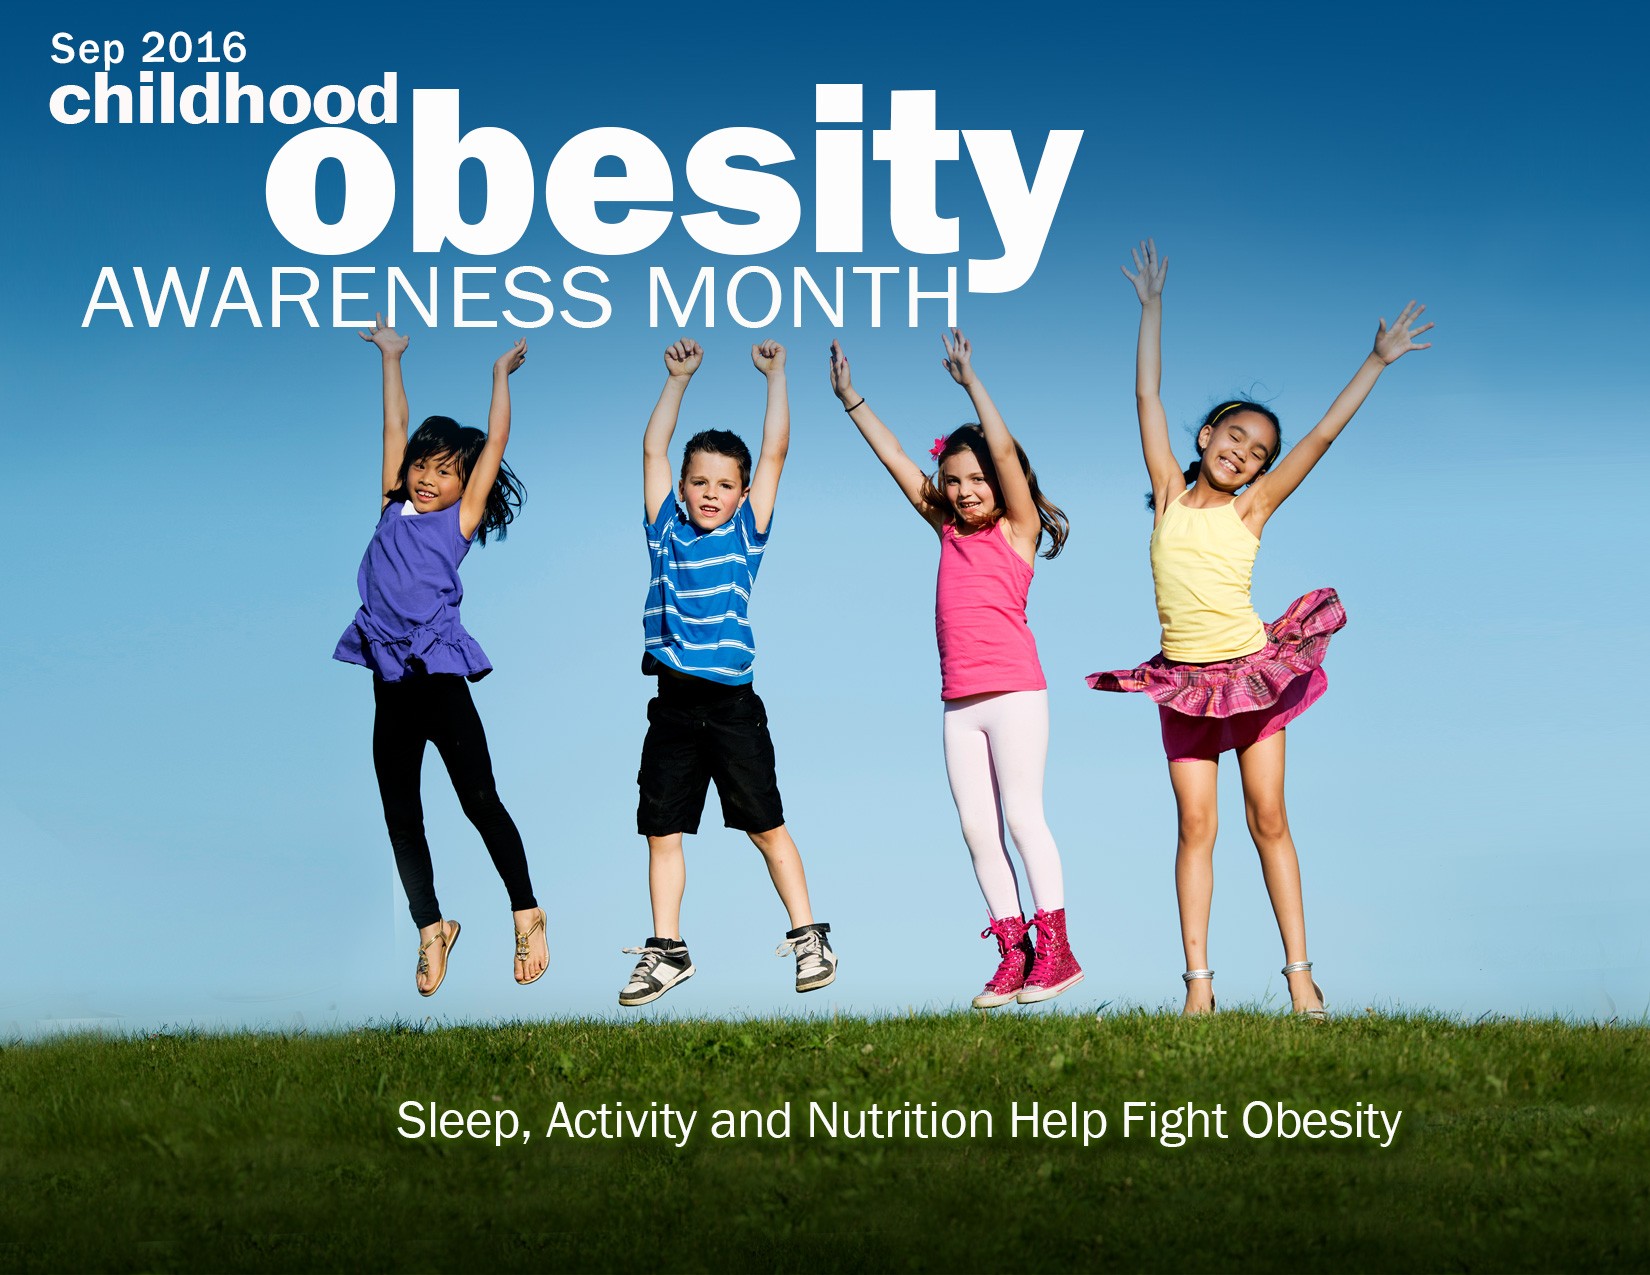 September is Childhood Obesity Awareness Month Article The United